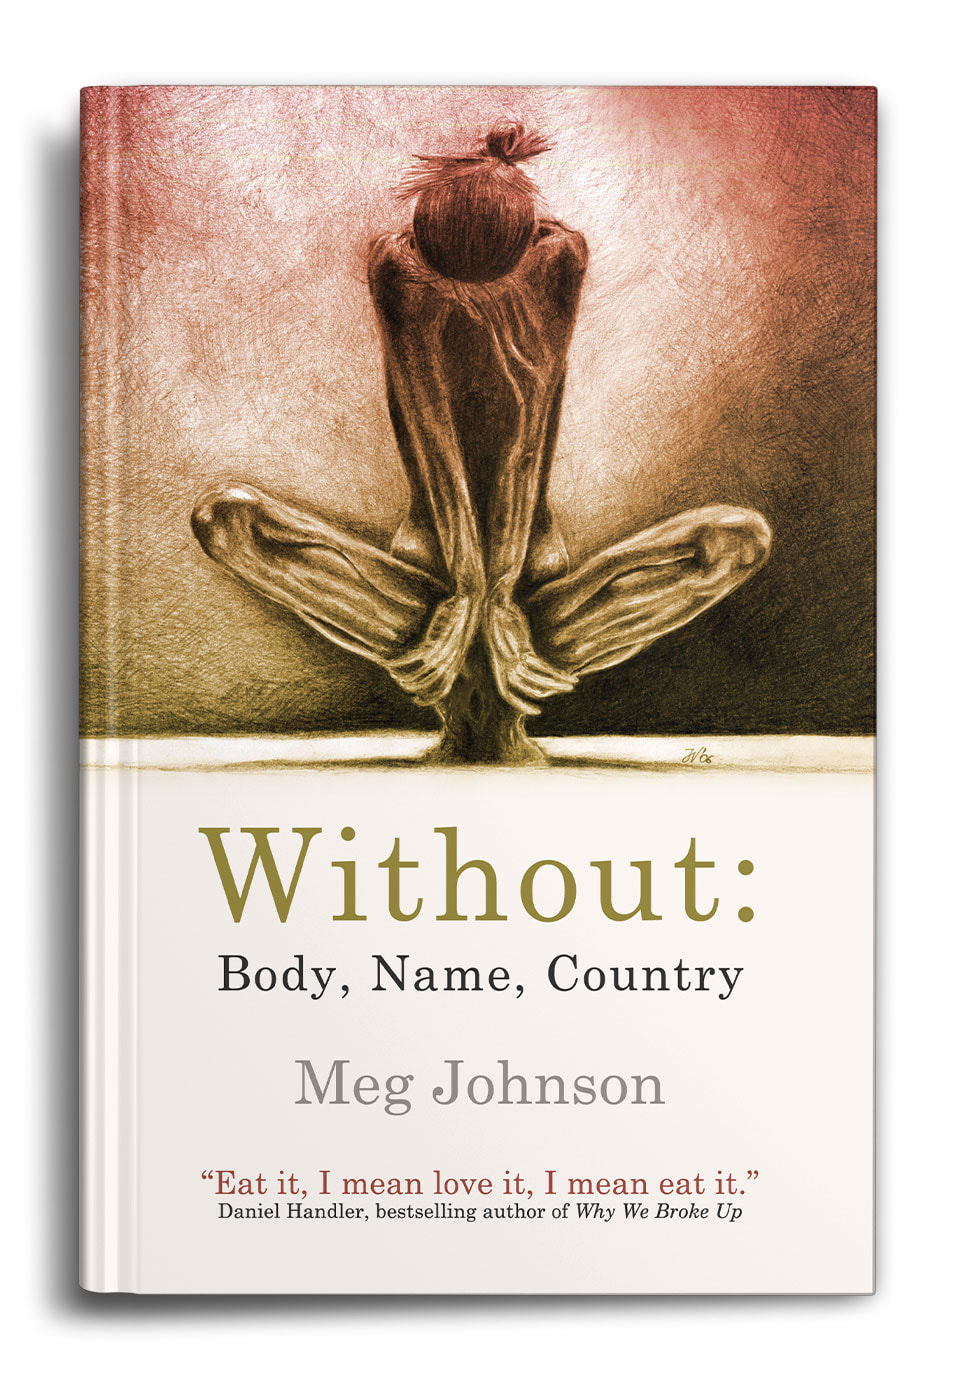 Without-Body-Name-Country-by-Meg-Johnson